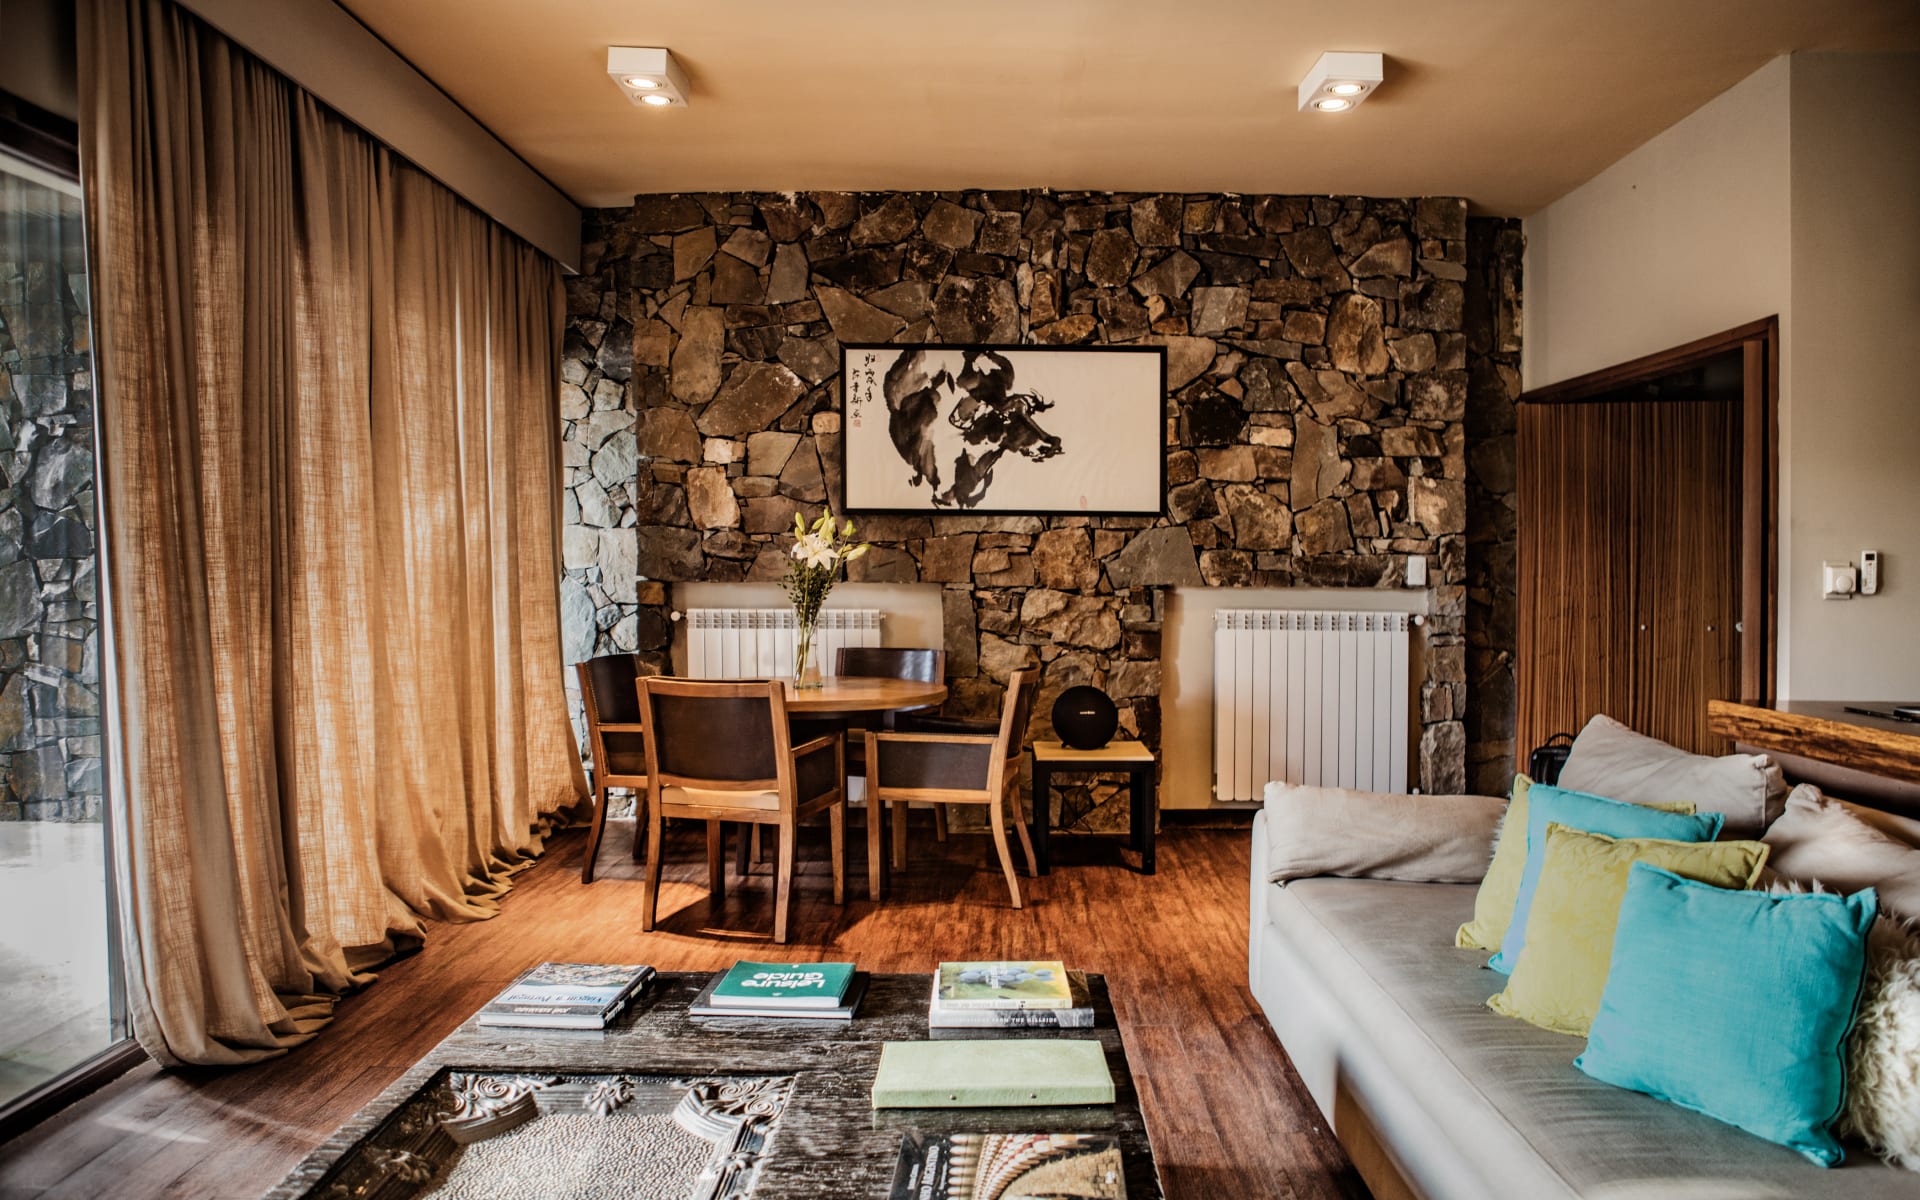 Canvas Wine Lodge Villas have a lounge with floor-to-ceiling windows, a stone wall featuring contemporary artwork and a dining table and sofa.